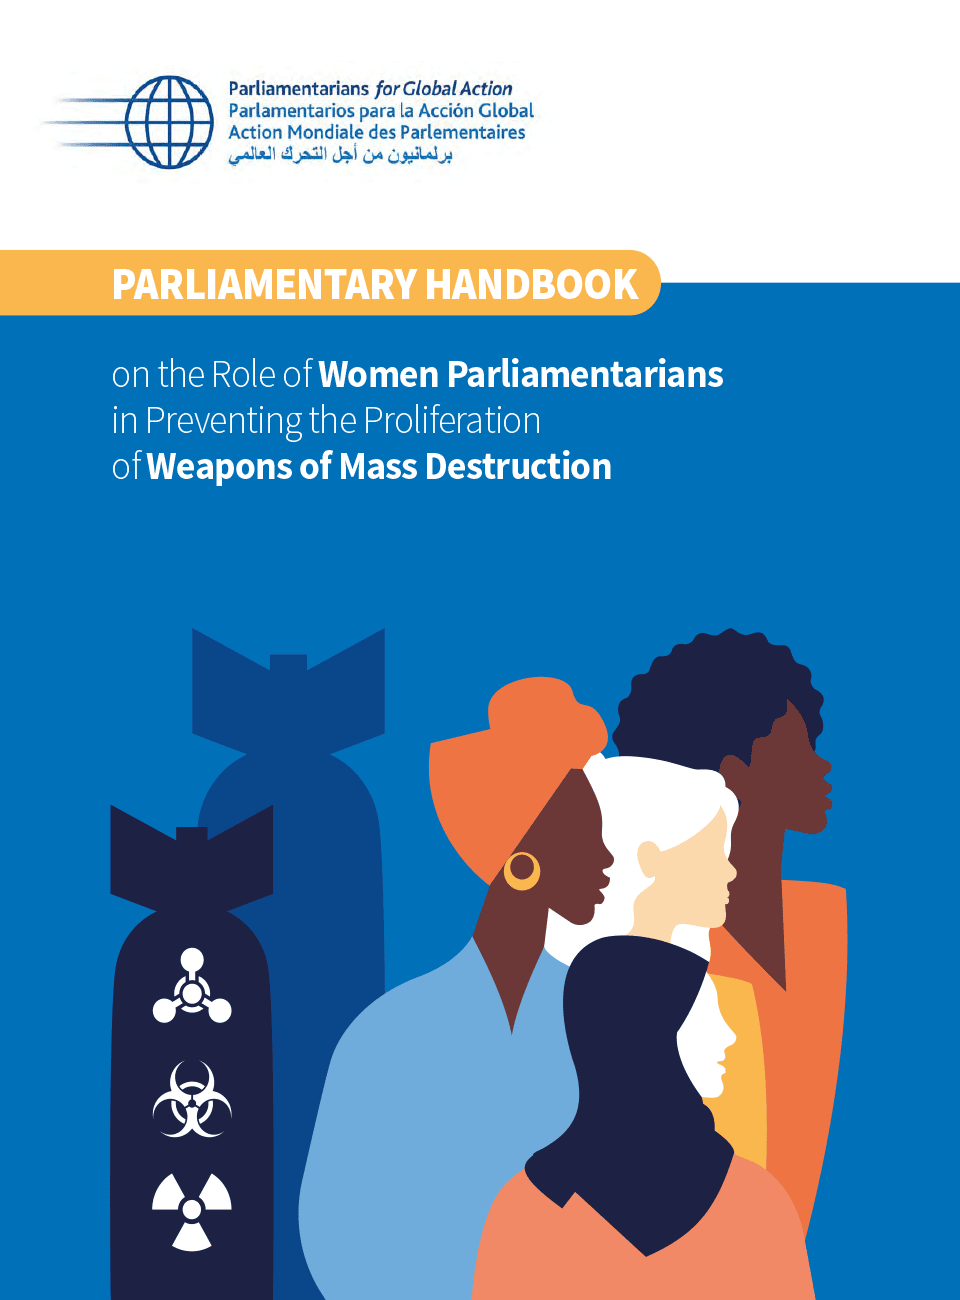 Parliamentary Handbook on the Role of Women Parliamentarians in Preventing the Proliferation of Weapons of Mass Destruction